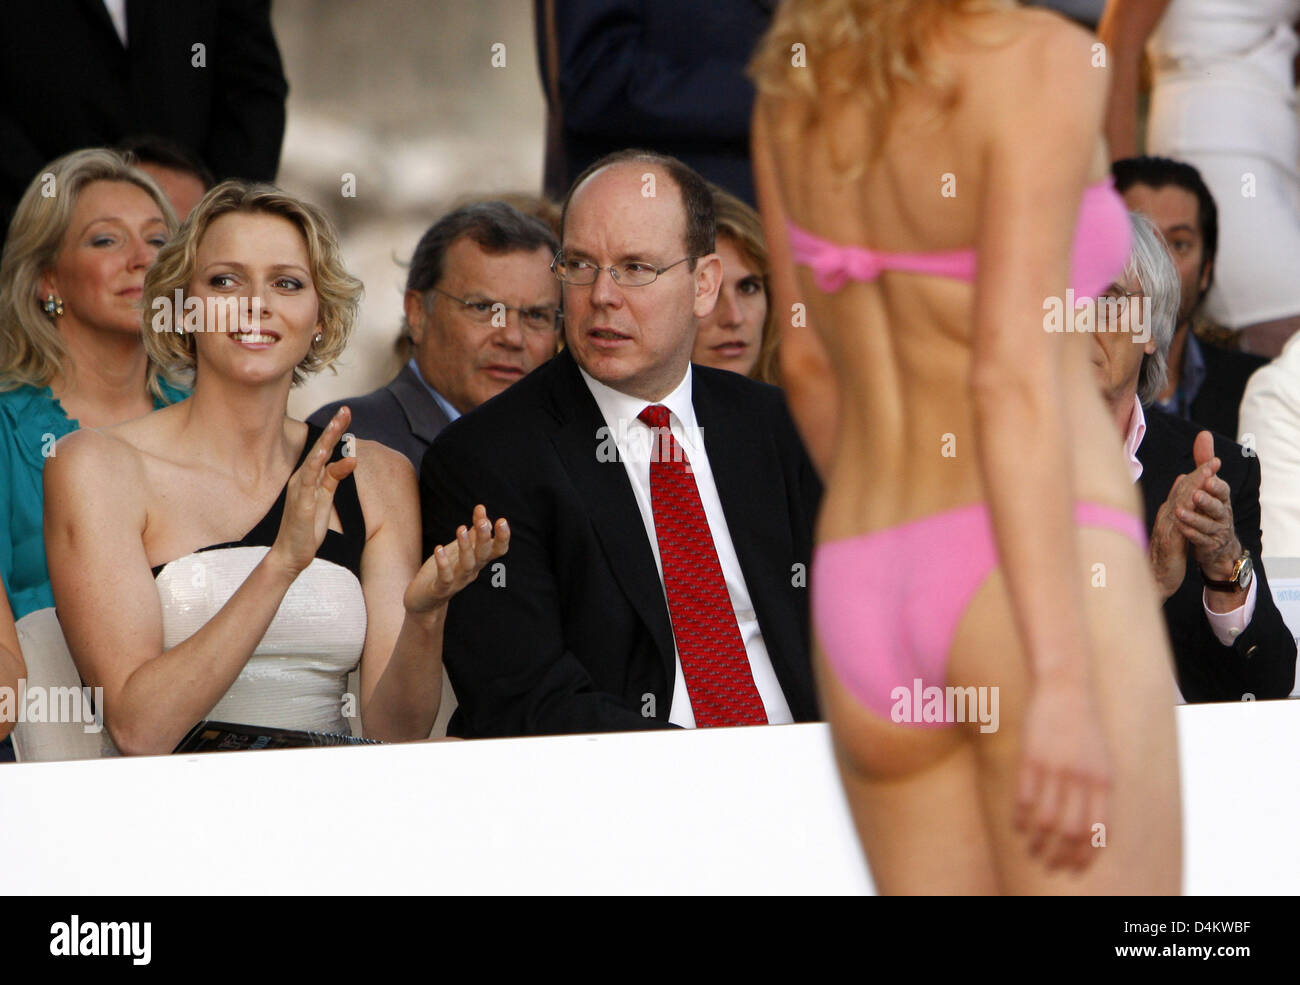 Prince Albert II of Monaco and his girlfriend Charlene Wittstock attend the fashion show of the Petra Ecclestone collection in Monte Carlo, Monaco, 22 May 2009. Petra Ecclestone is the daughter of Formula One boss Bernie Ecclestone. The Formula One Grand Prix of Monaco will take place on 24 May. Photo: JENS BUETTNER Stock Photo